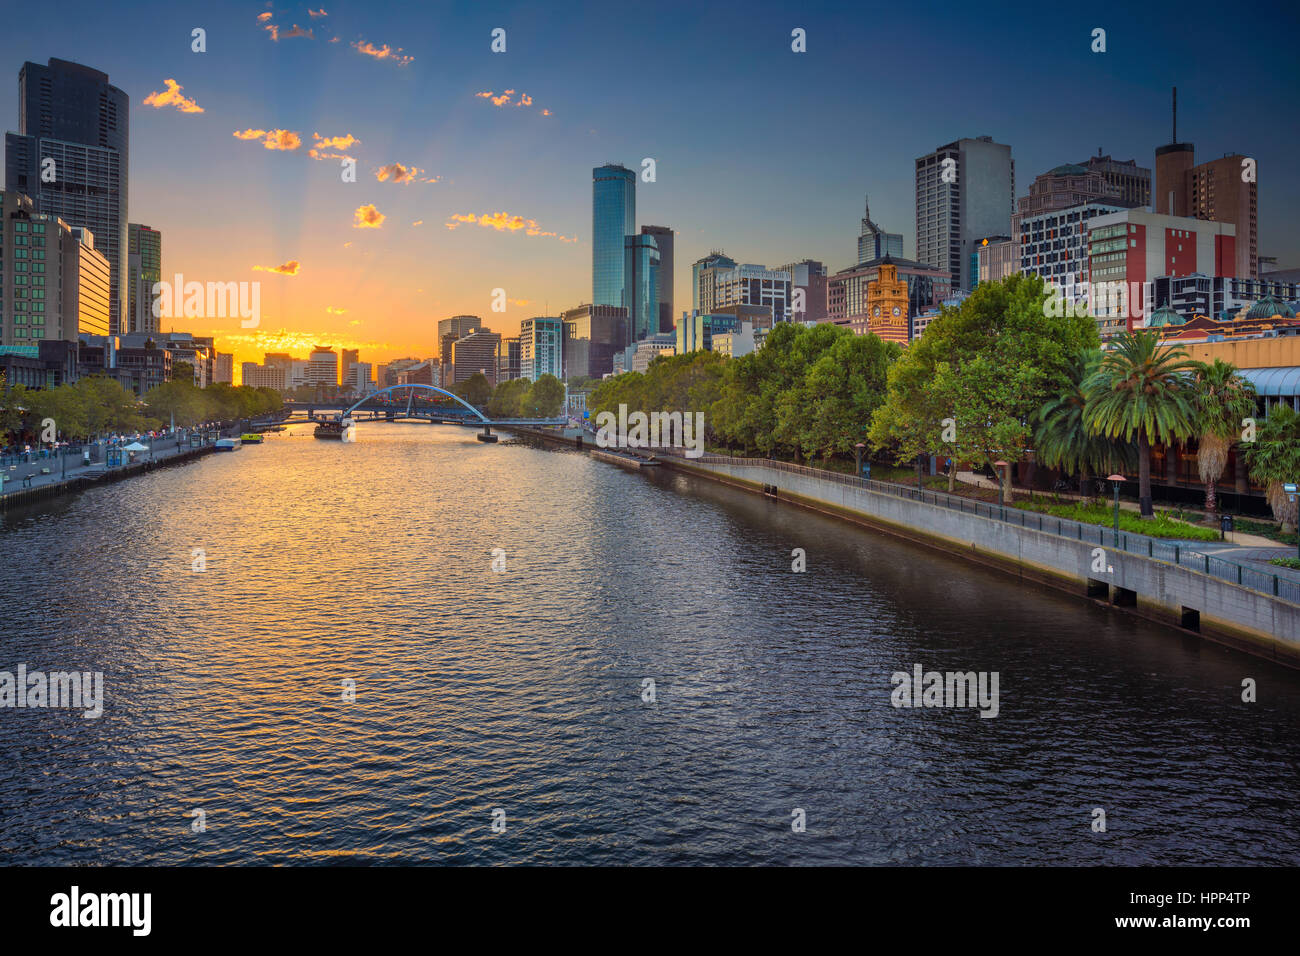 City of Melbourne. Cityscape image of Melbourne, Australia during summer sunset. Stock Photo